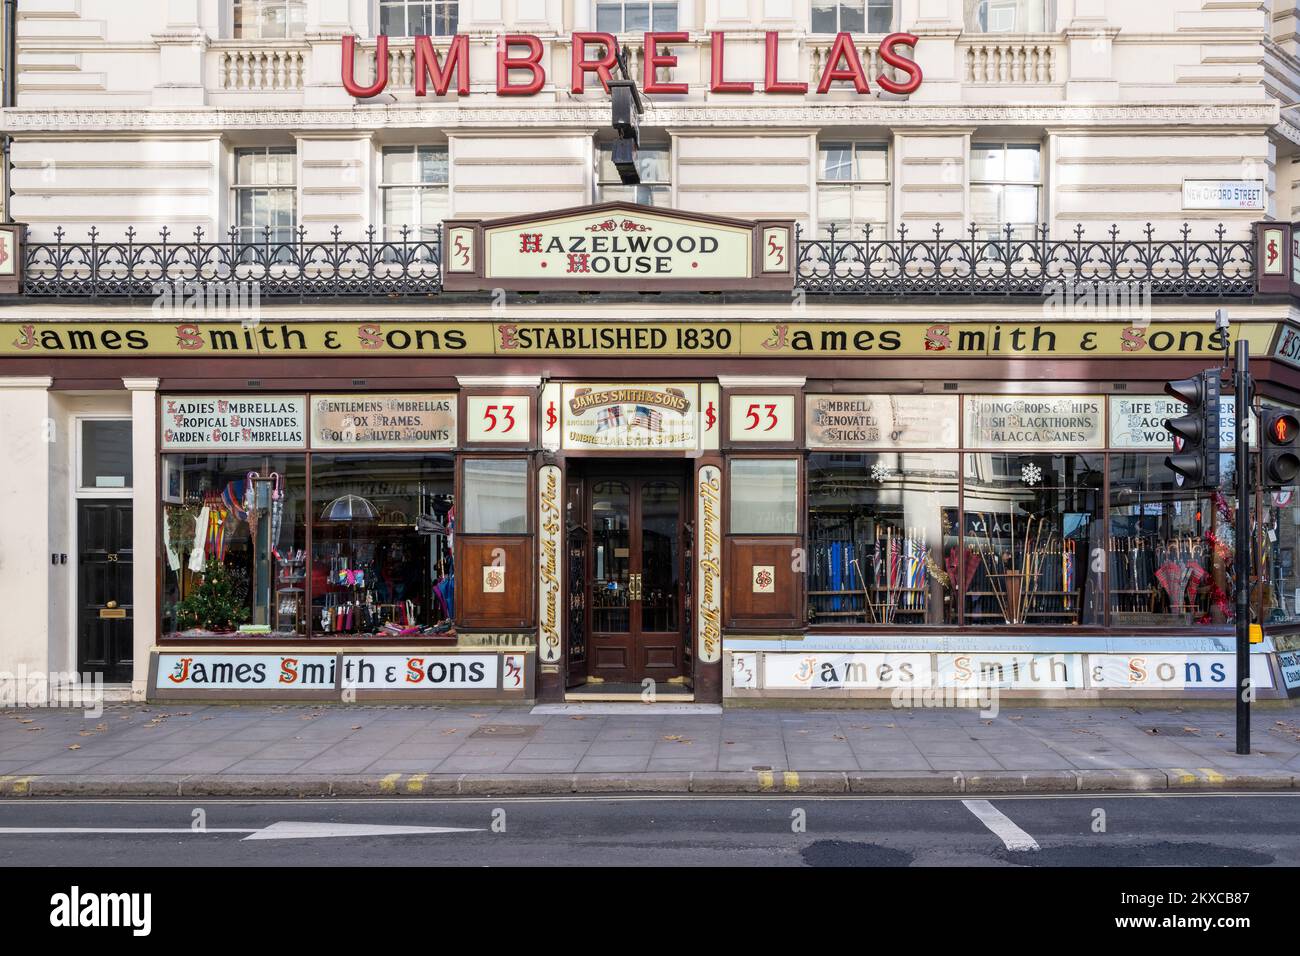 James Smith & Sons umbrella shop, Hazelwood House, New Oxford Street, with largely unaltered Victorian shop front.  Hazelwood House, 53 New Oxford Str Stock Photo